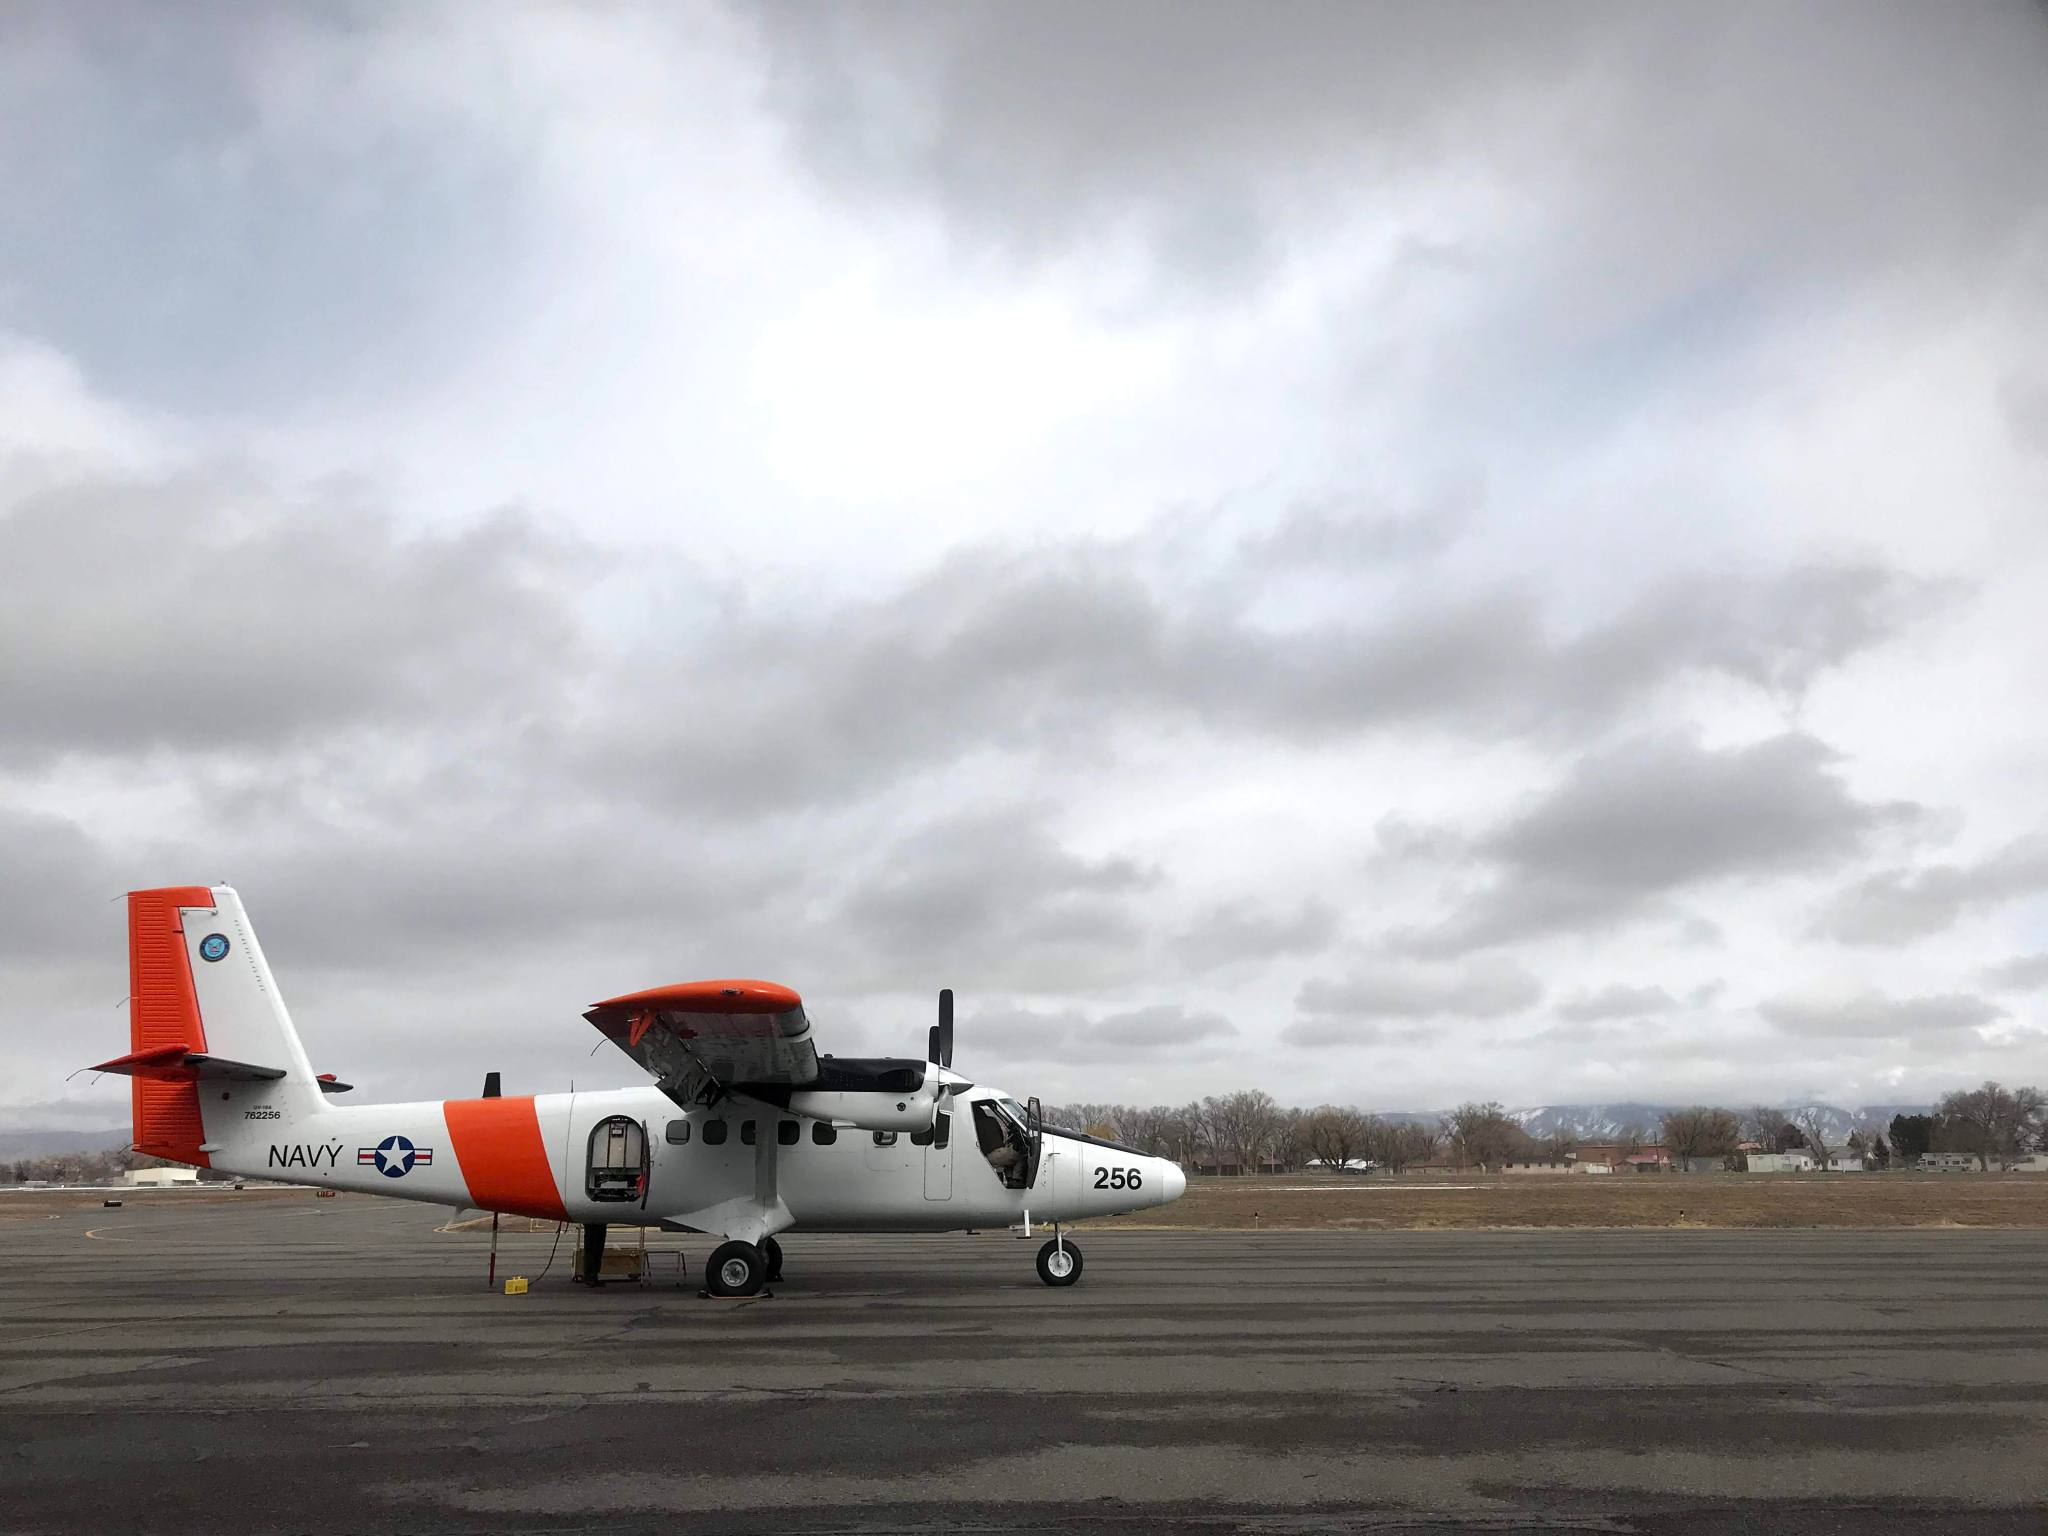 A DHC-6 Twin Otter sits on the runway under cloudy skies